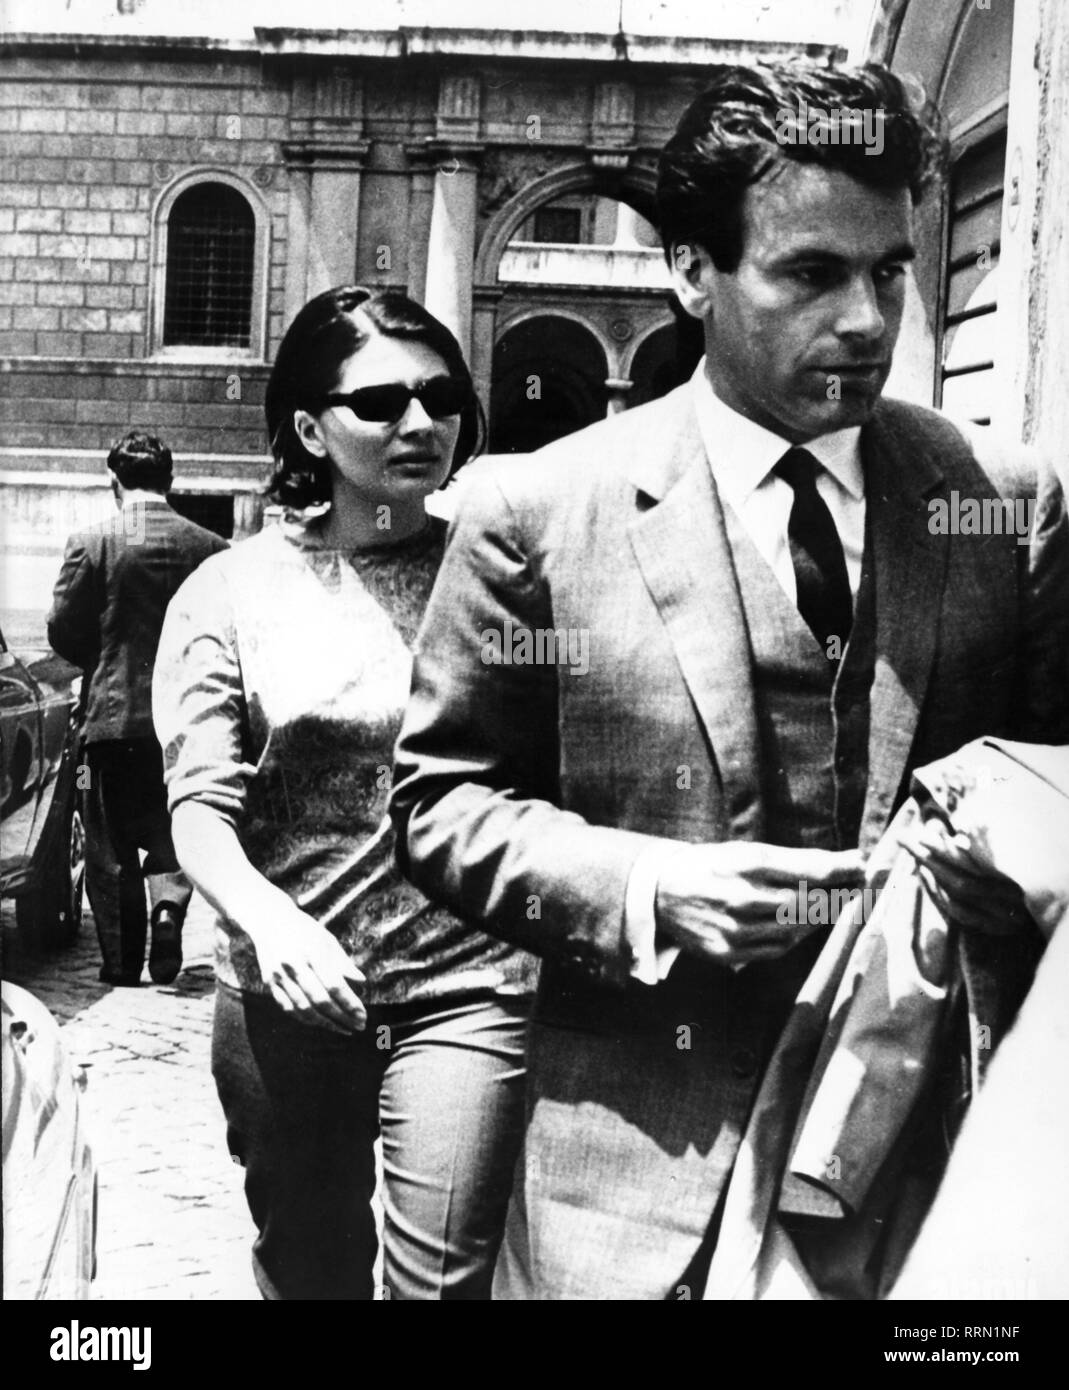 Soraya, 22.6.1932 - 25.10.2001, Empress of Persia 12.2.1951 - 6.4.1958, half length, with Maximilian Schell, Rome, 3.6.1964, Additional-Rights-Clearance-Info-Not-Available Stock Photo